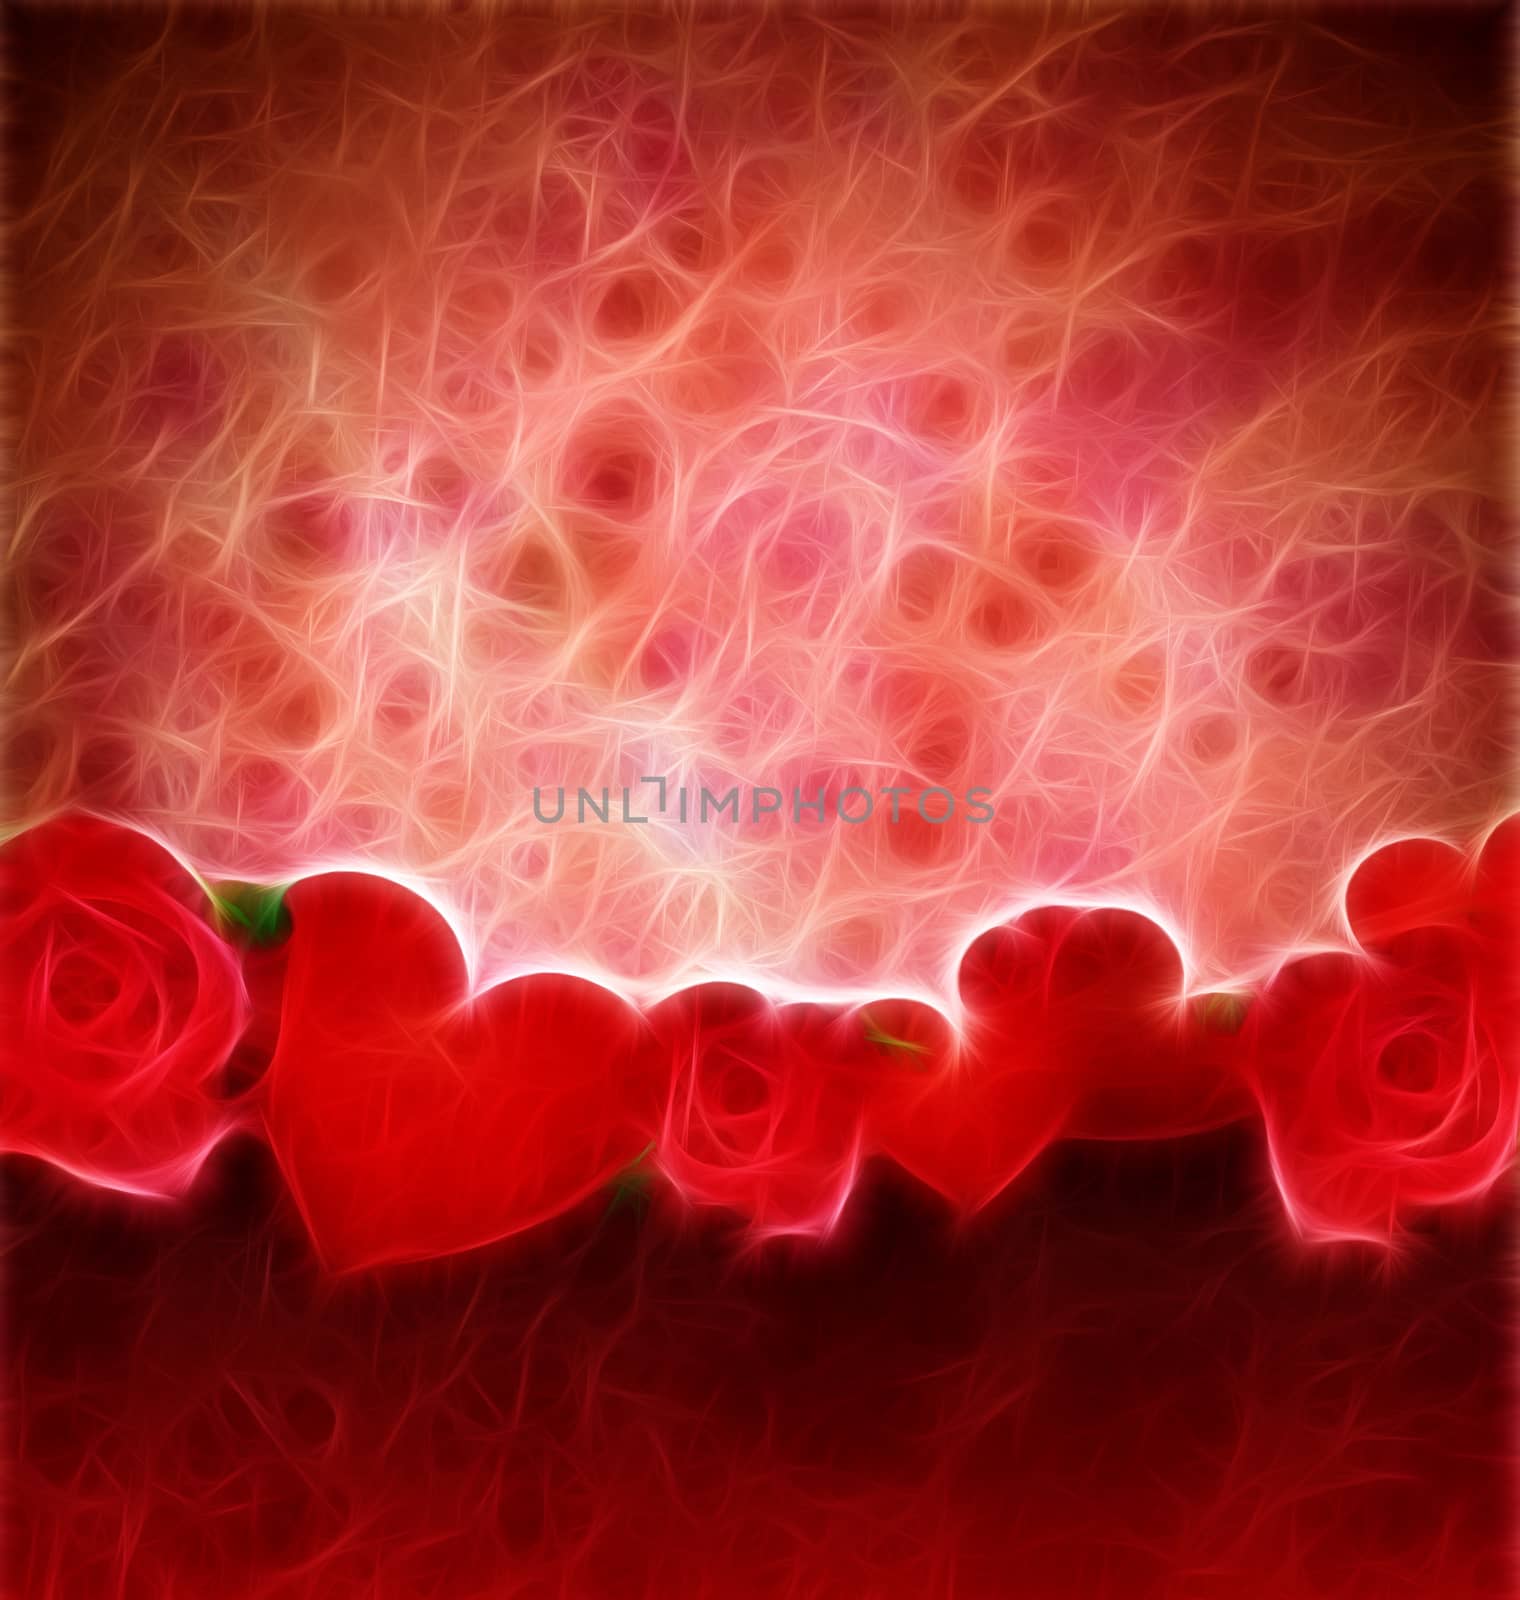 grunge red hearts and roses border red background lovely backgro by CherJu